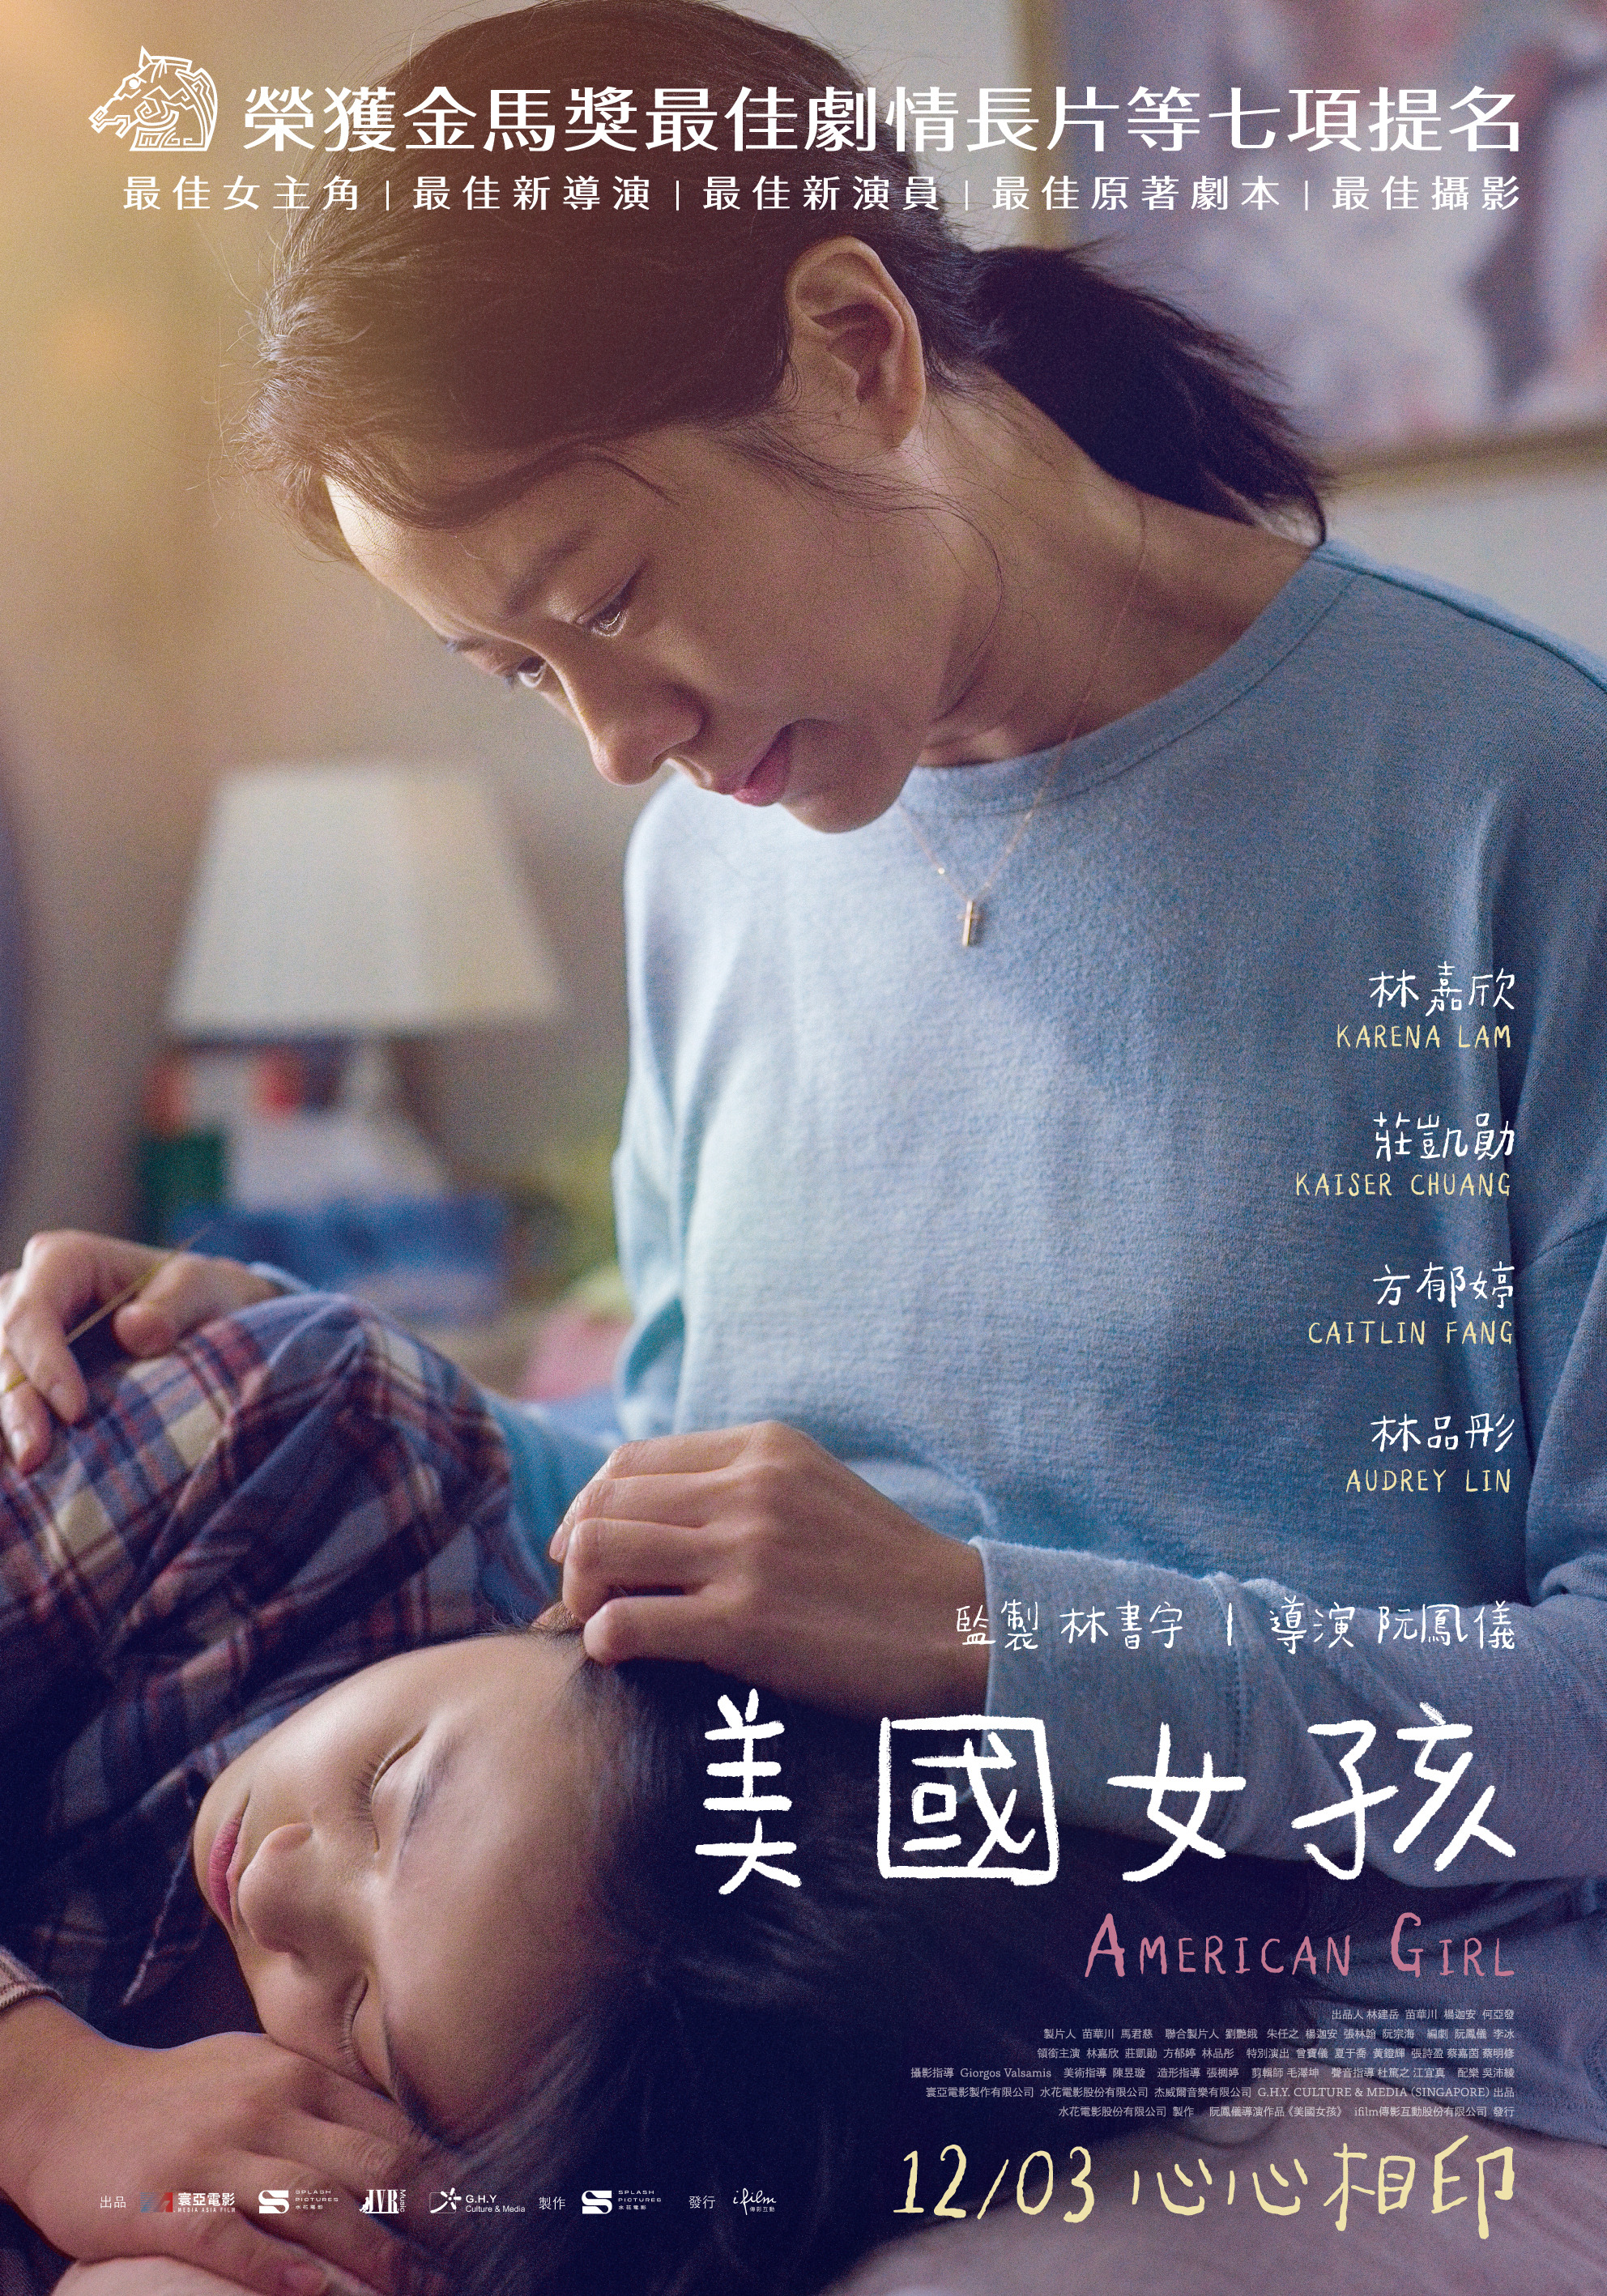 Mega Sized Movie Poster Image for Mei guo nu hai (#2 of 2)